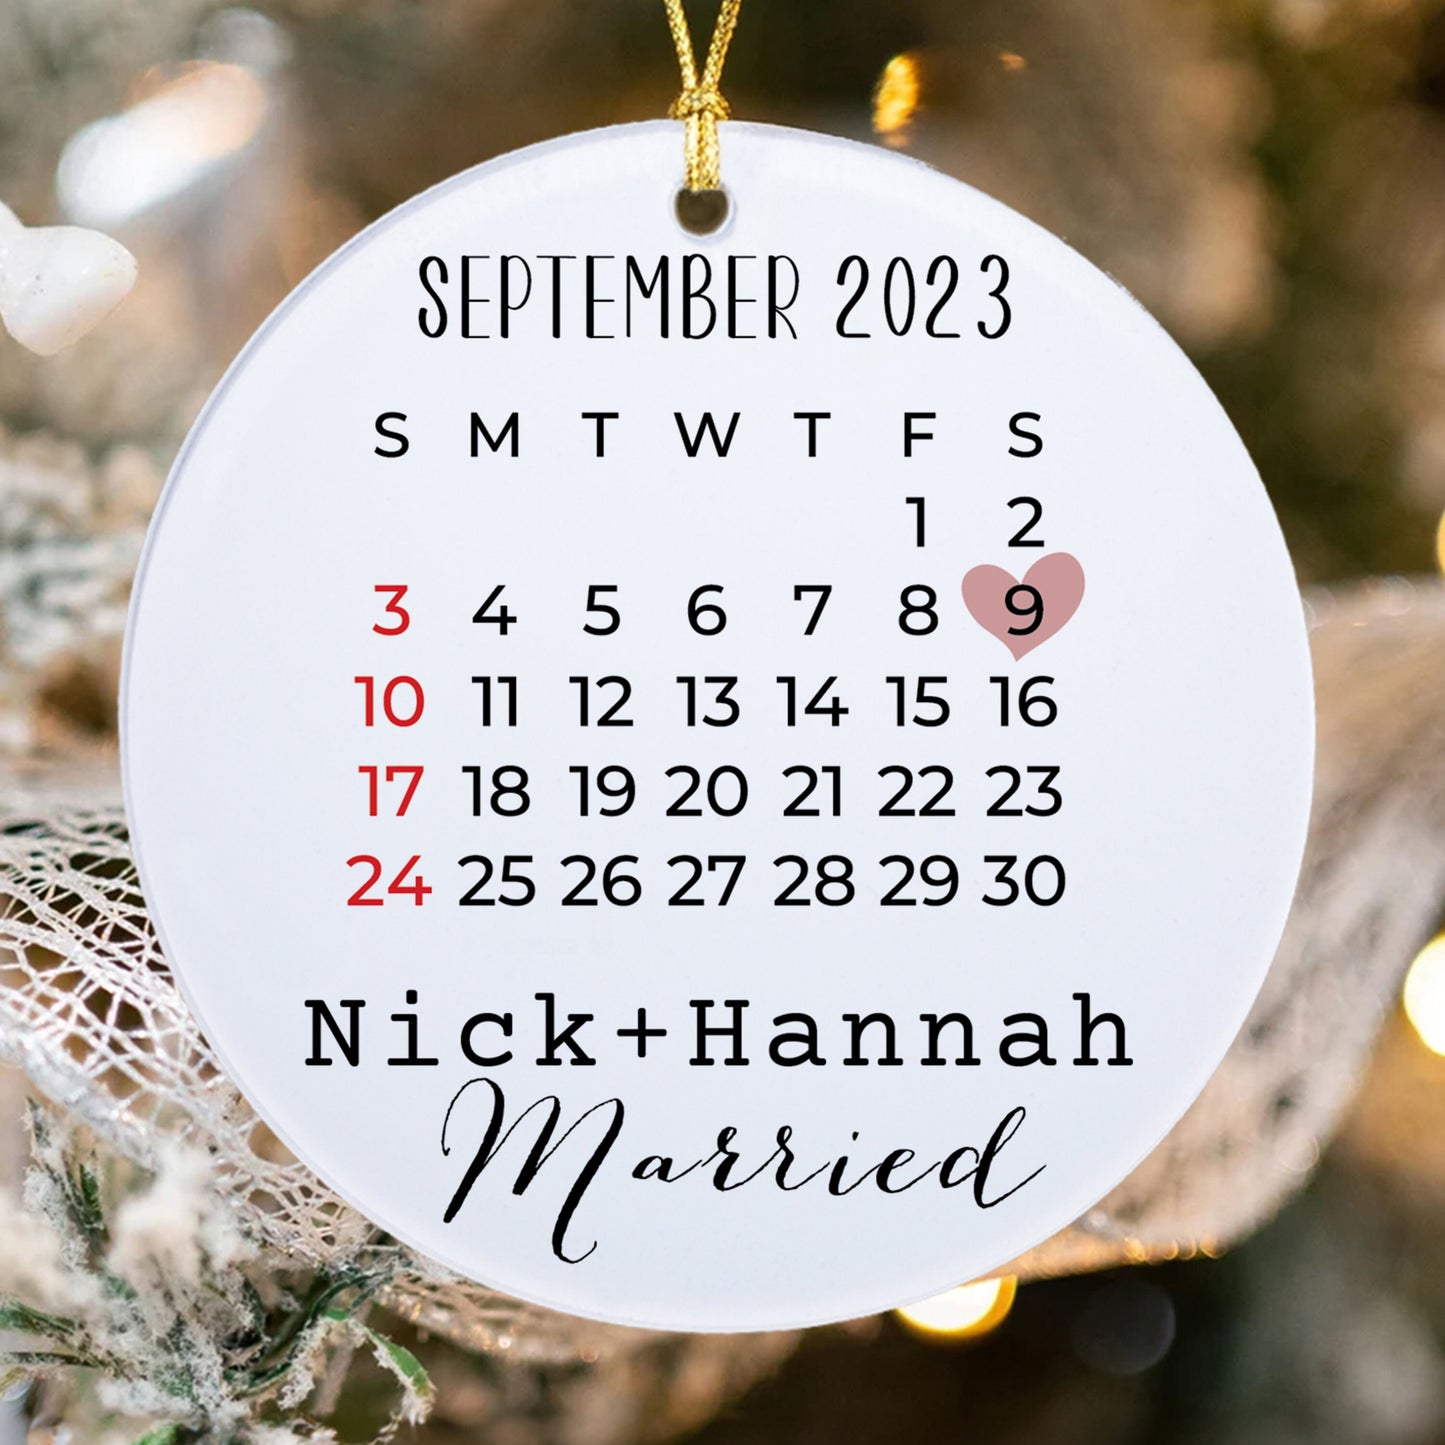 Personalized Married Ornament with Wedding date, Newlywed Gift, first Christmas Ornament, Personalized Wedding Ornament, Wedding Gift